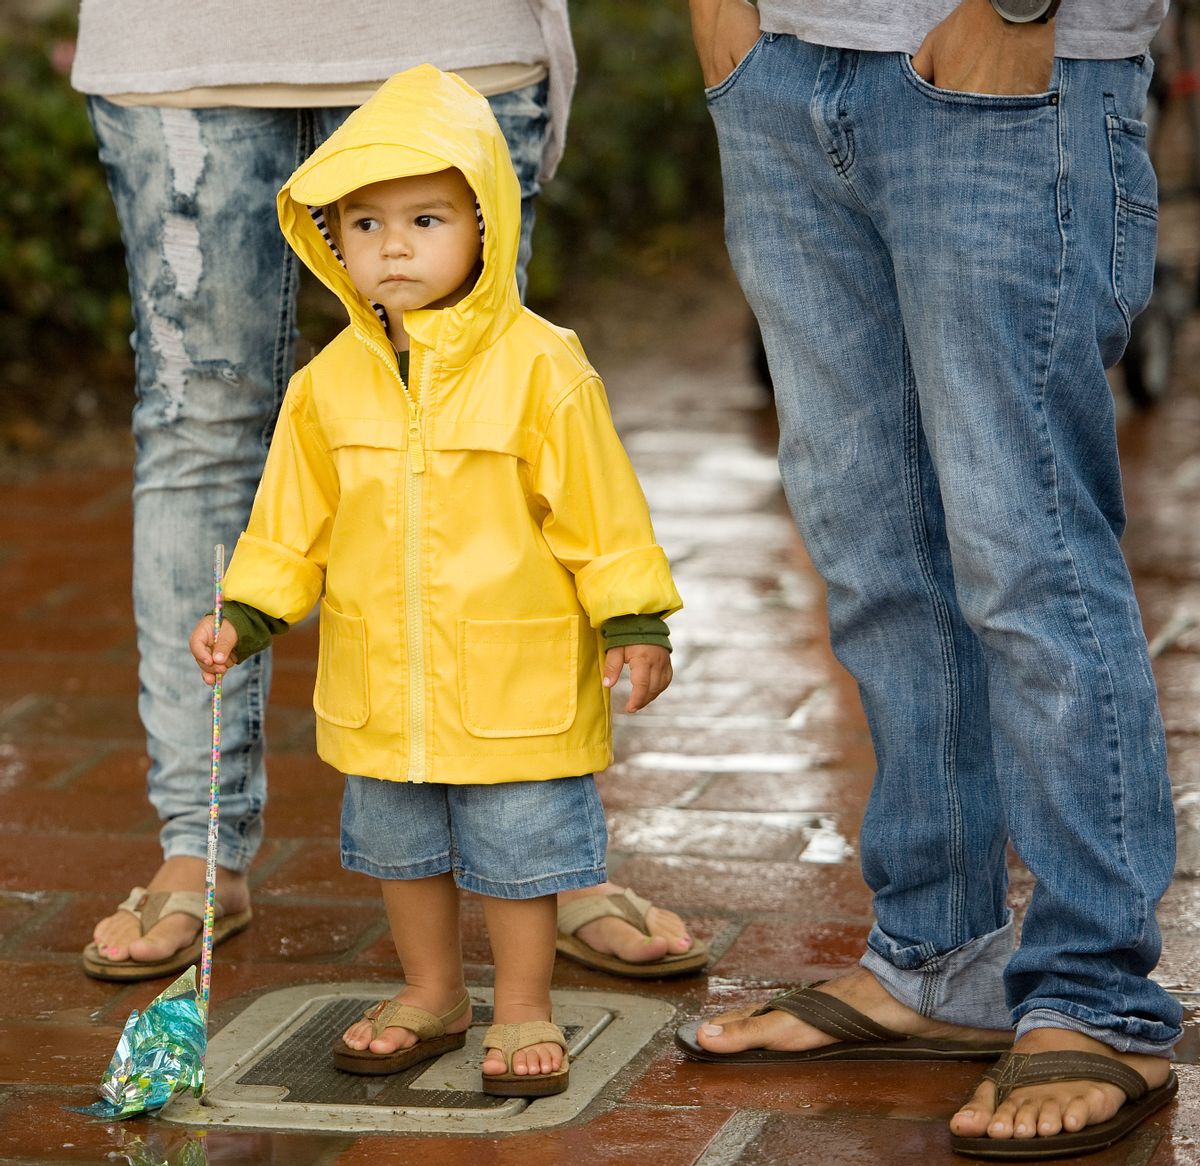 Ezekiel Ekinaka, 1, with his parents Aaron and Juliet, wears a raincoat as he experiences rain for the second time in his life, at the San Clemente, Calif. Ocean Festival before the public was urged to evacuate due to lightning on Saturday, July 18, 2015. (Mindy Schauer/The Orange County Register via AP)  (AP)